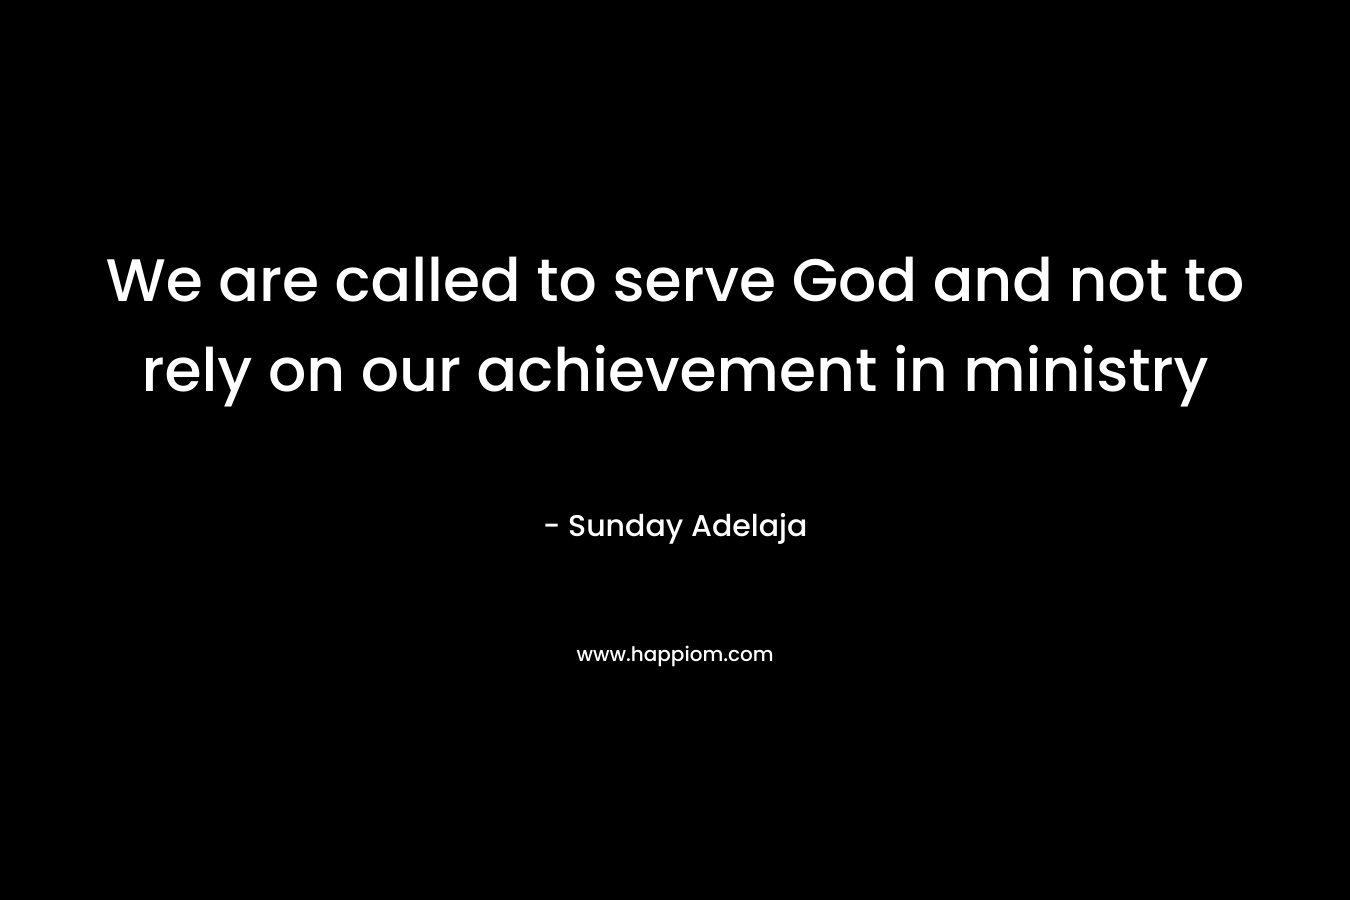 We are called to serve God and not to rely on our achievement in ministry